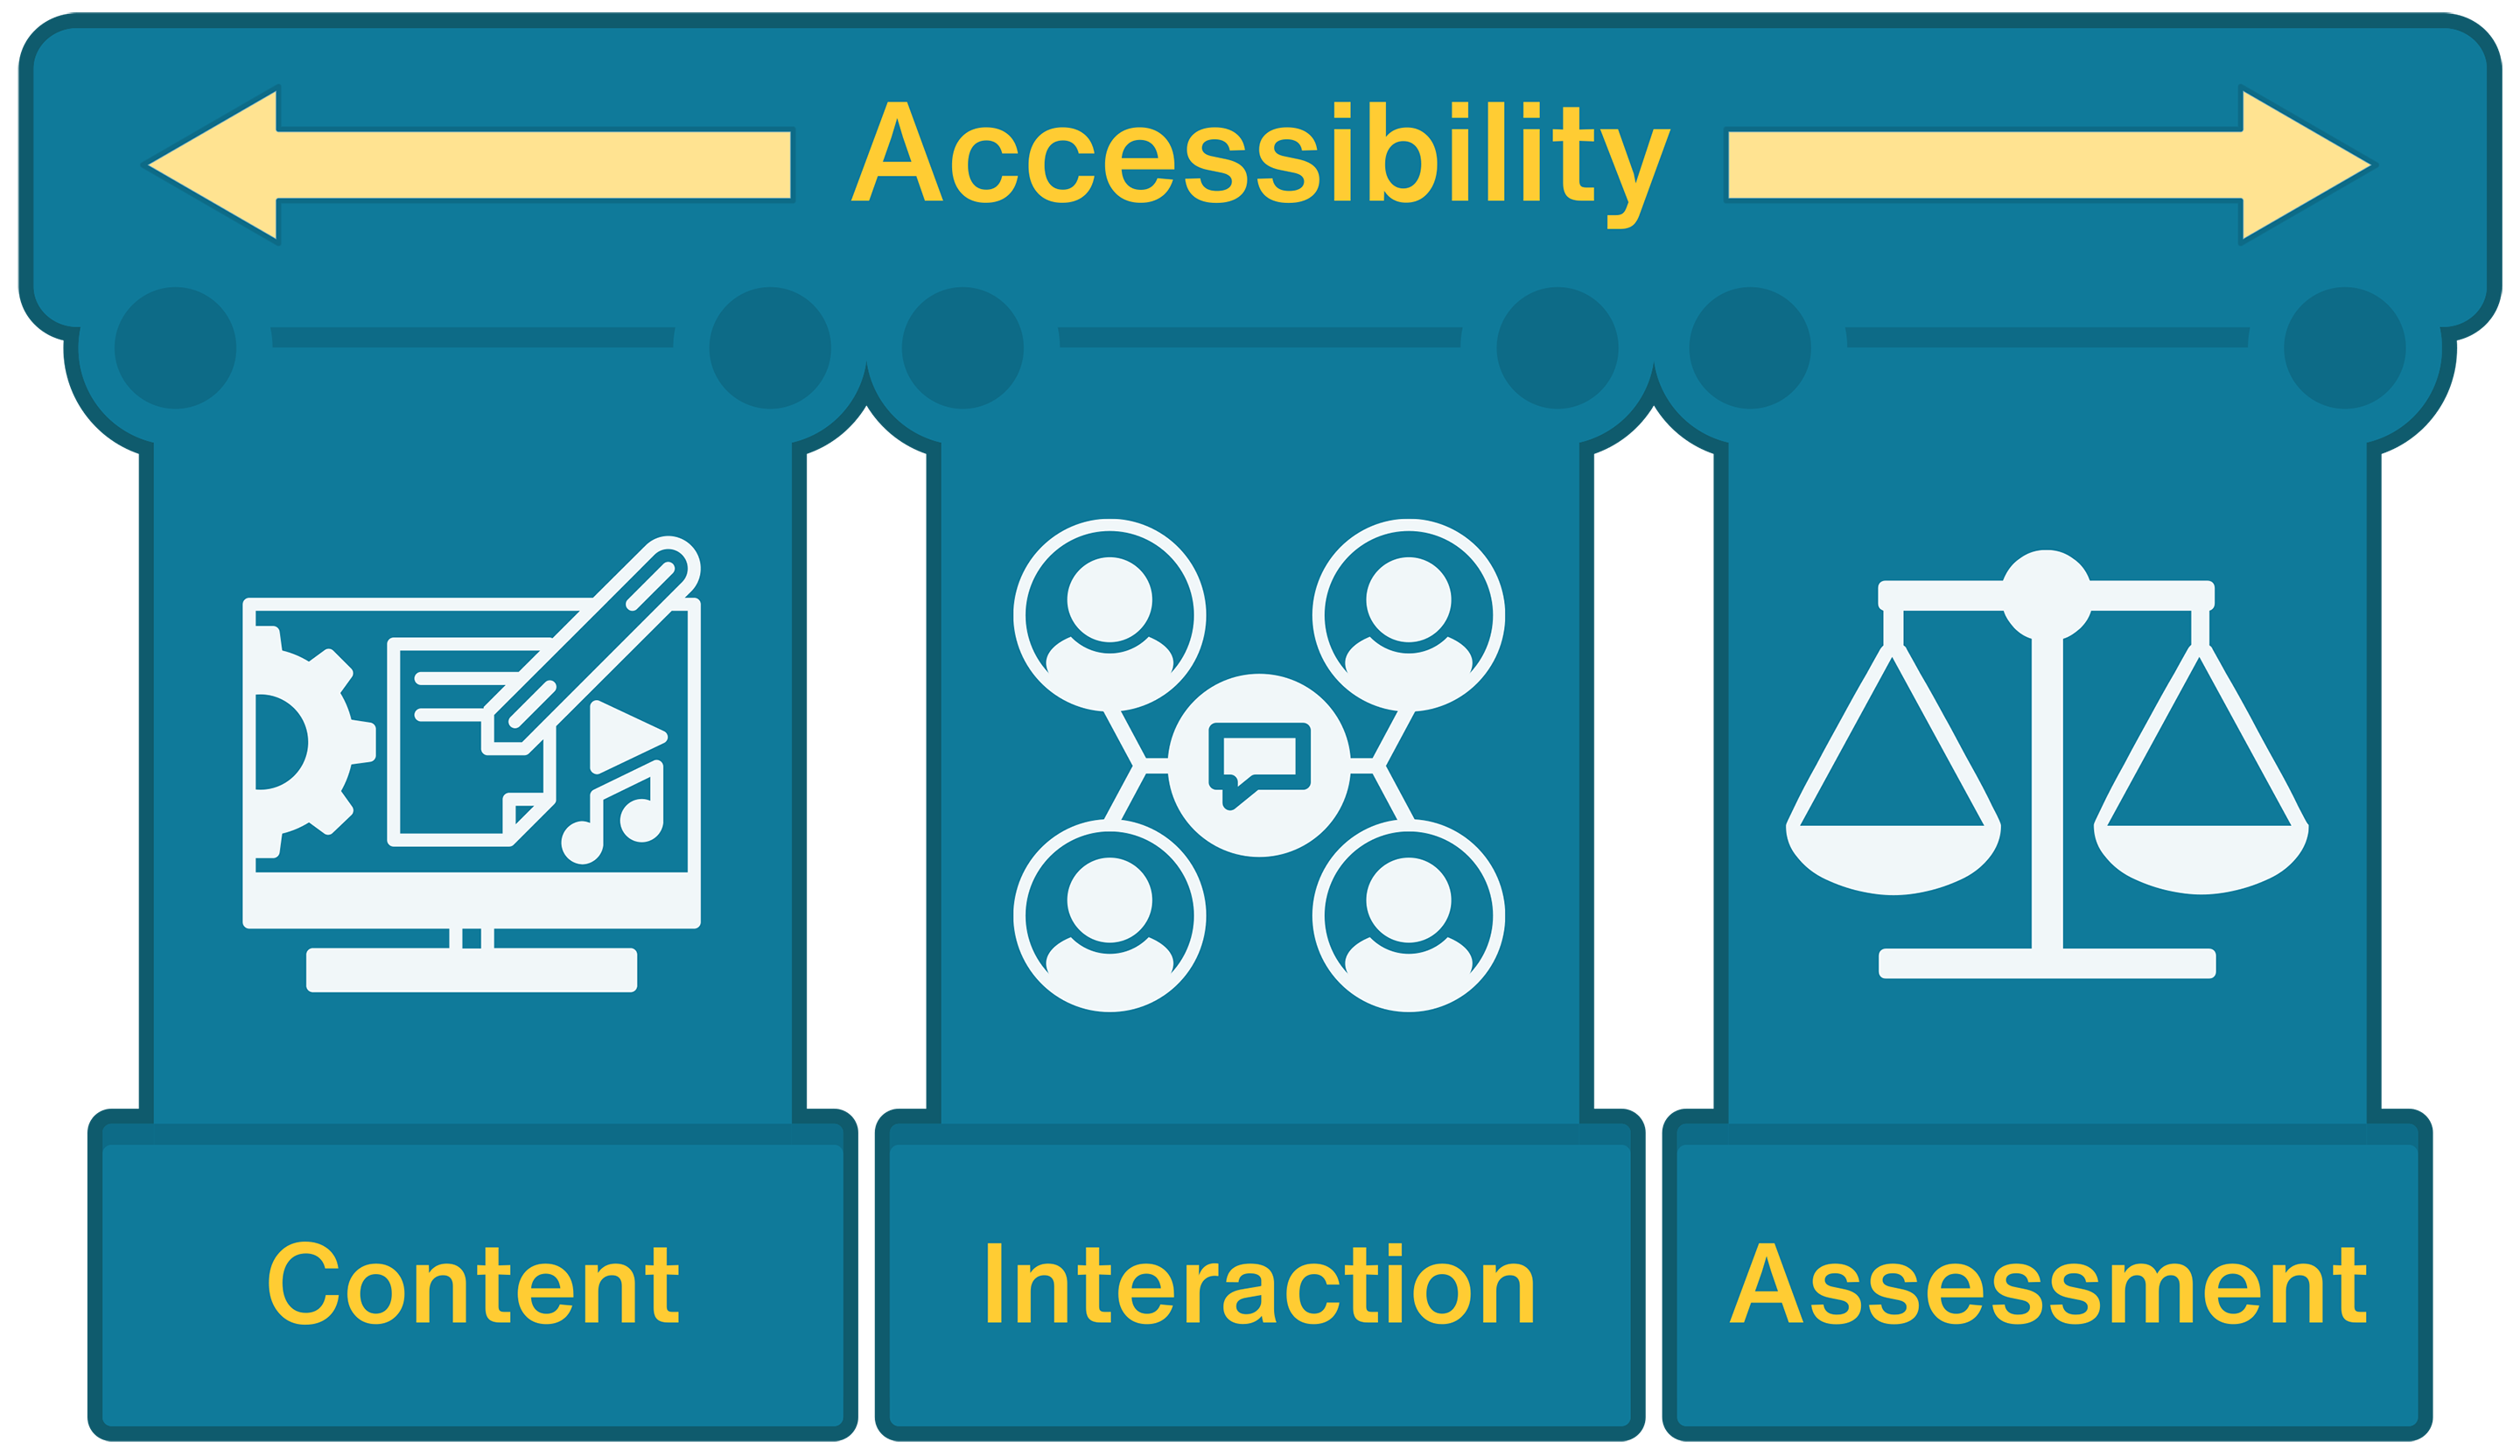 Accessibility should be enabled in course content, interaction, and assessment